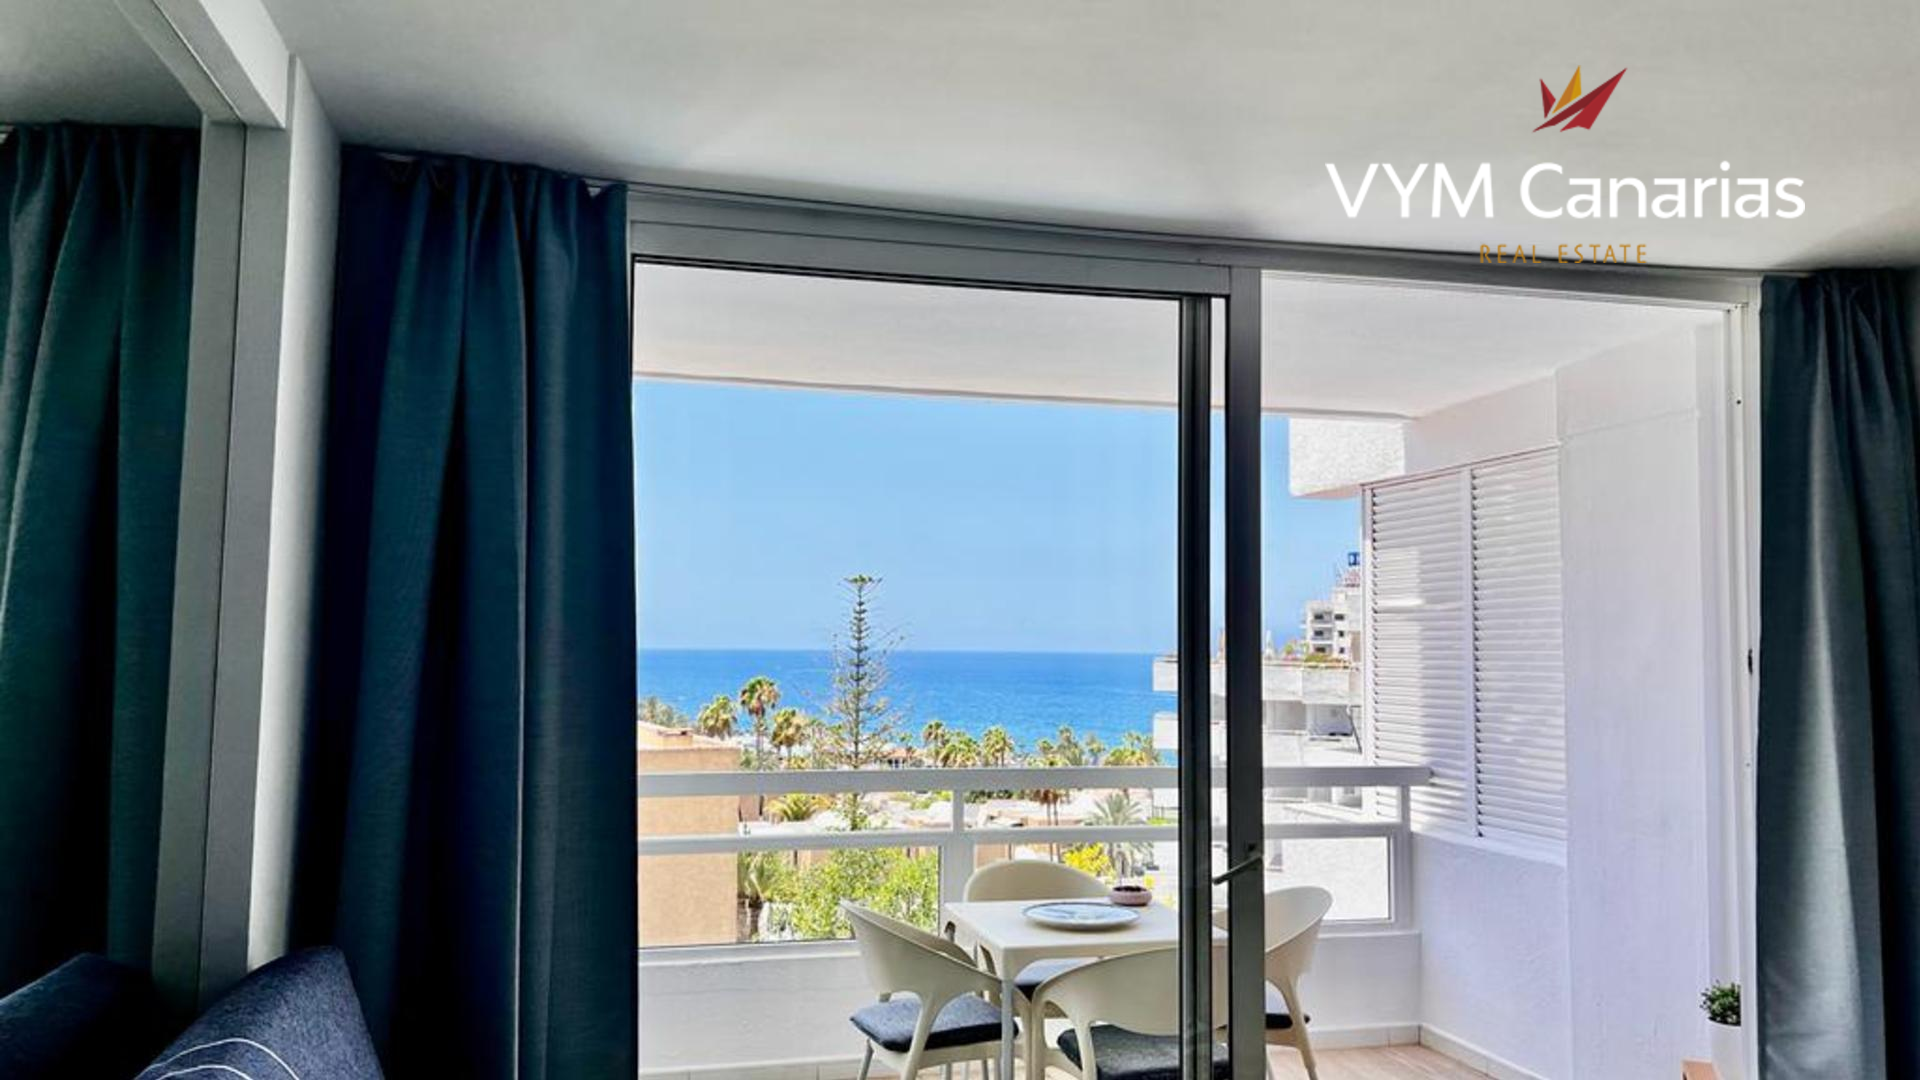 Apartment in Las Americas marketed by Vym Canarias